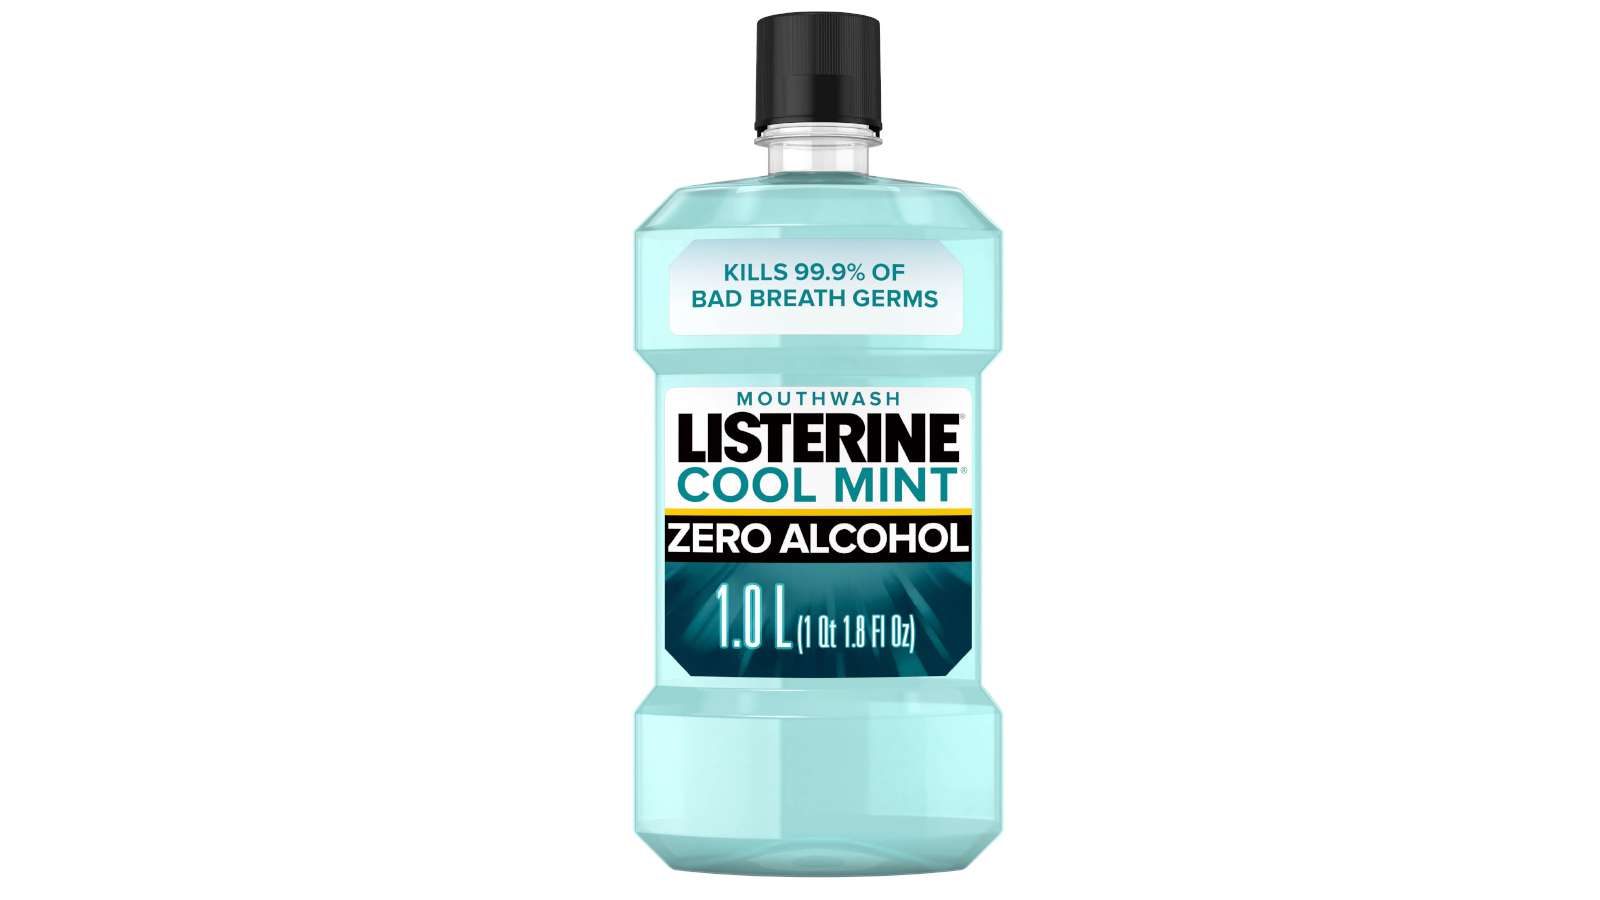 bottle of listerine zero alcohol-free mouthwash for bad breath, cool mint, 1 l